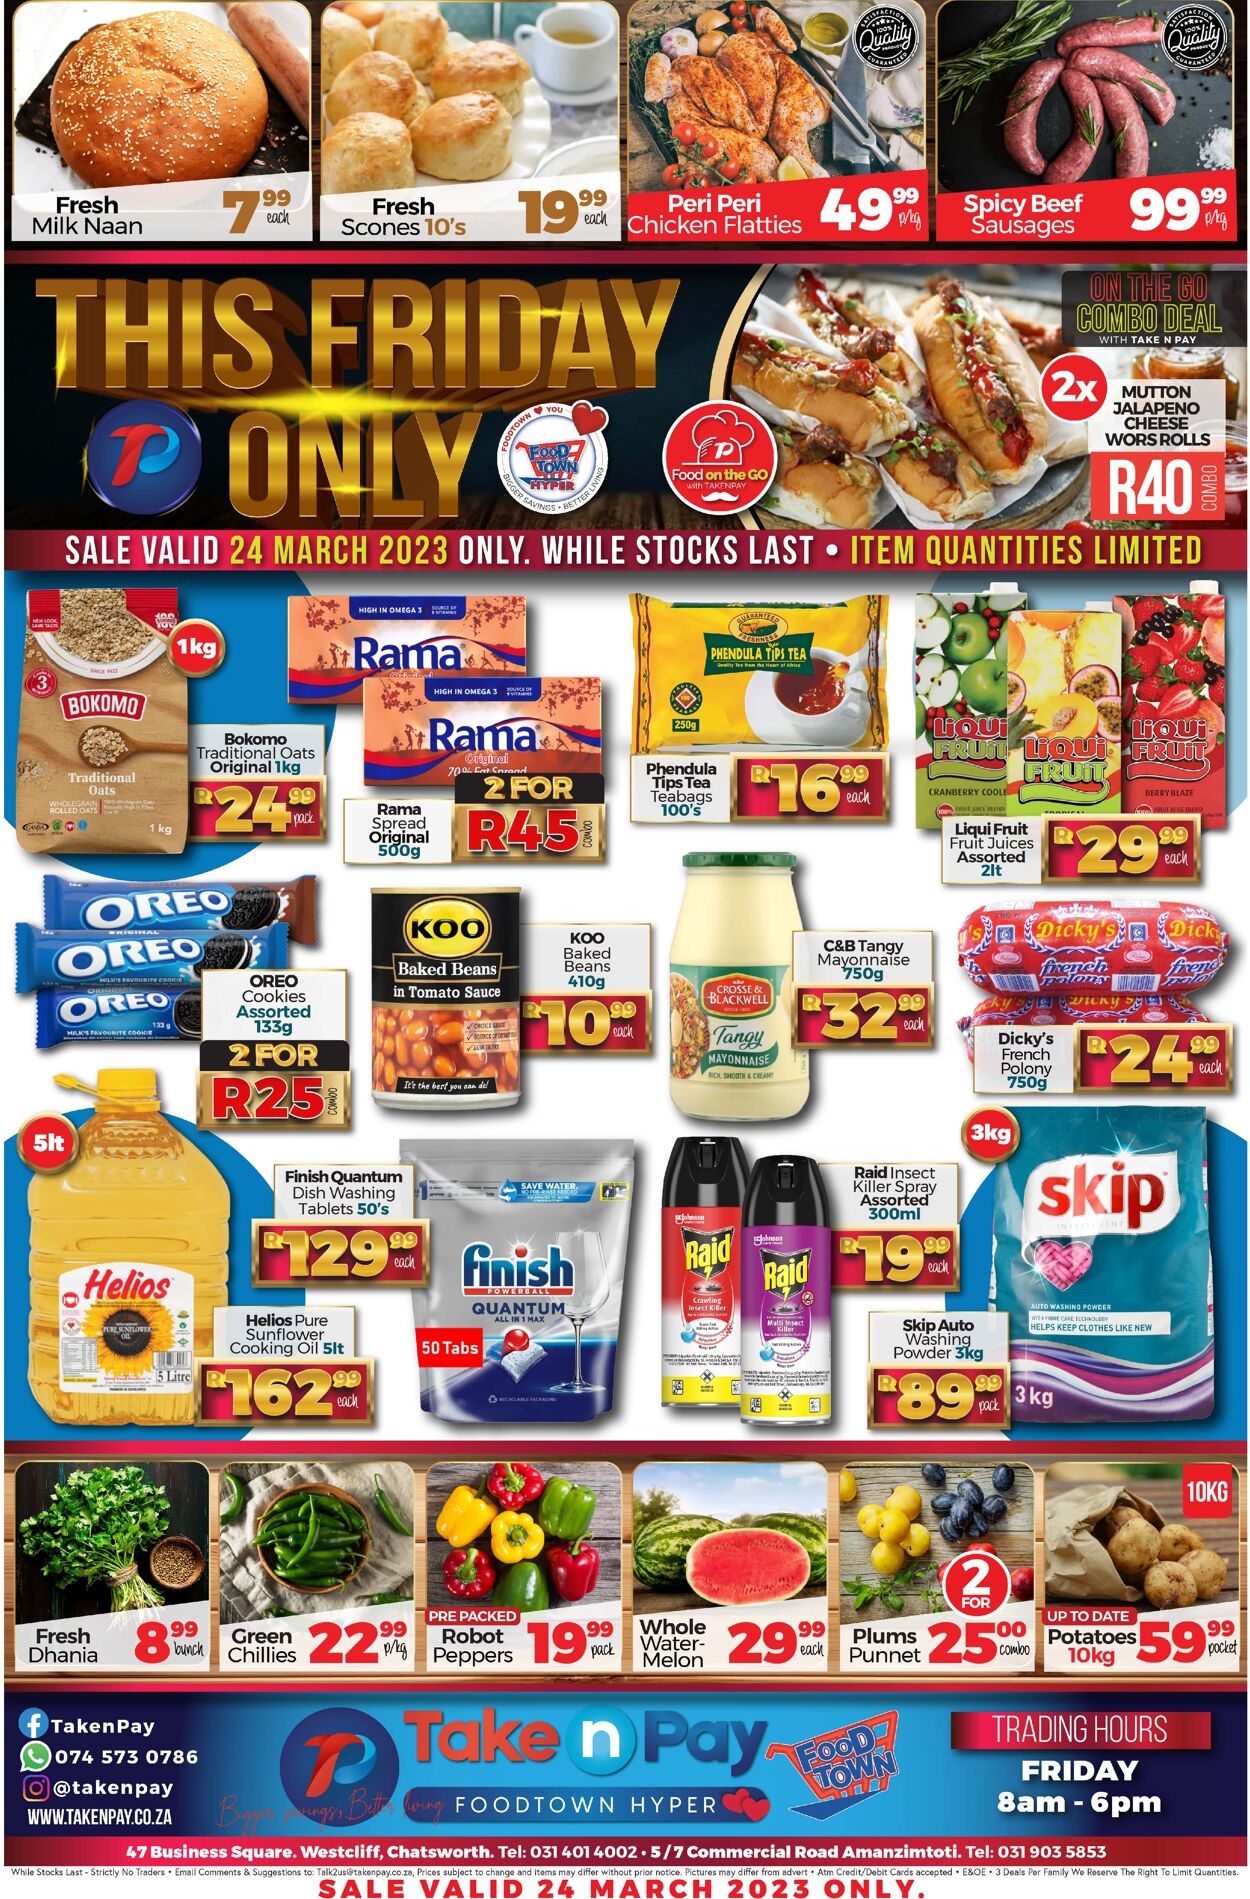 Take n Pay Promotional specials